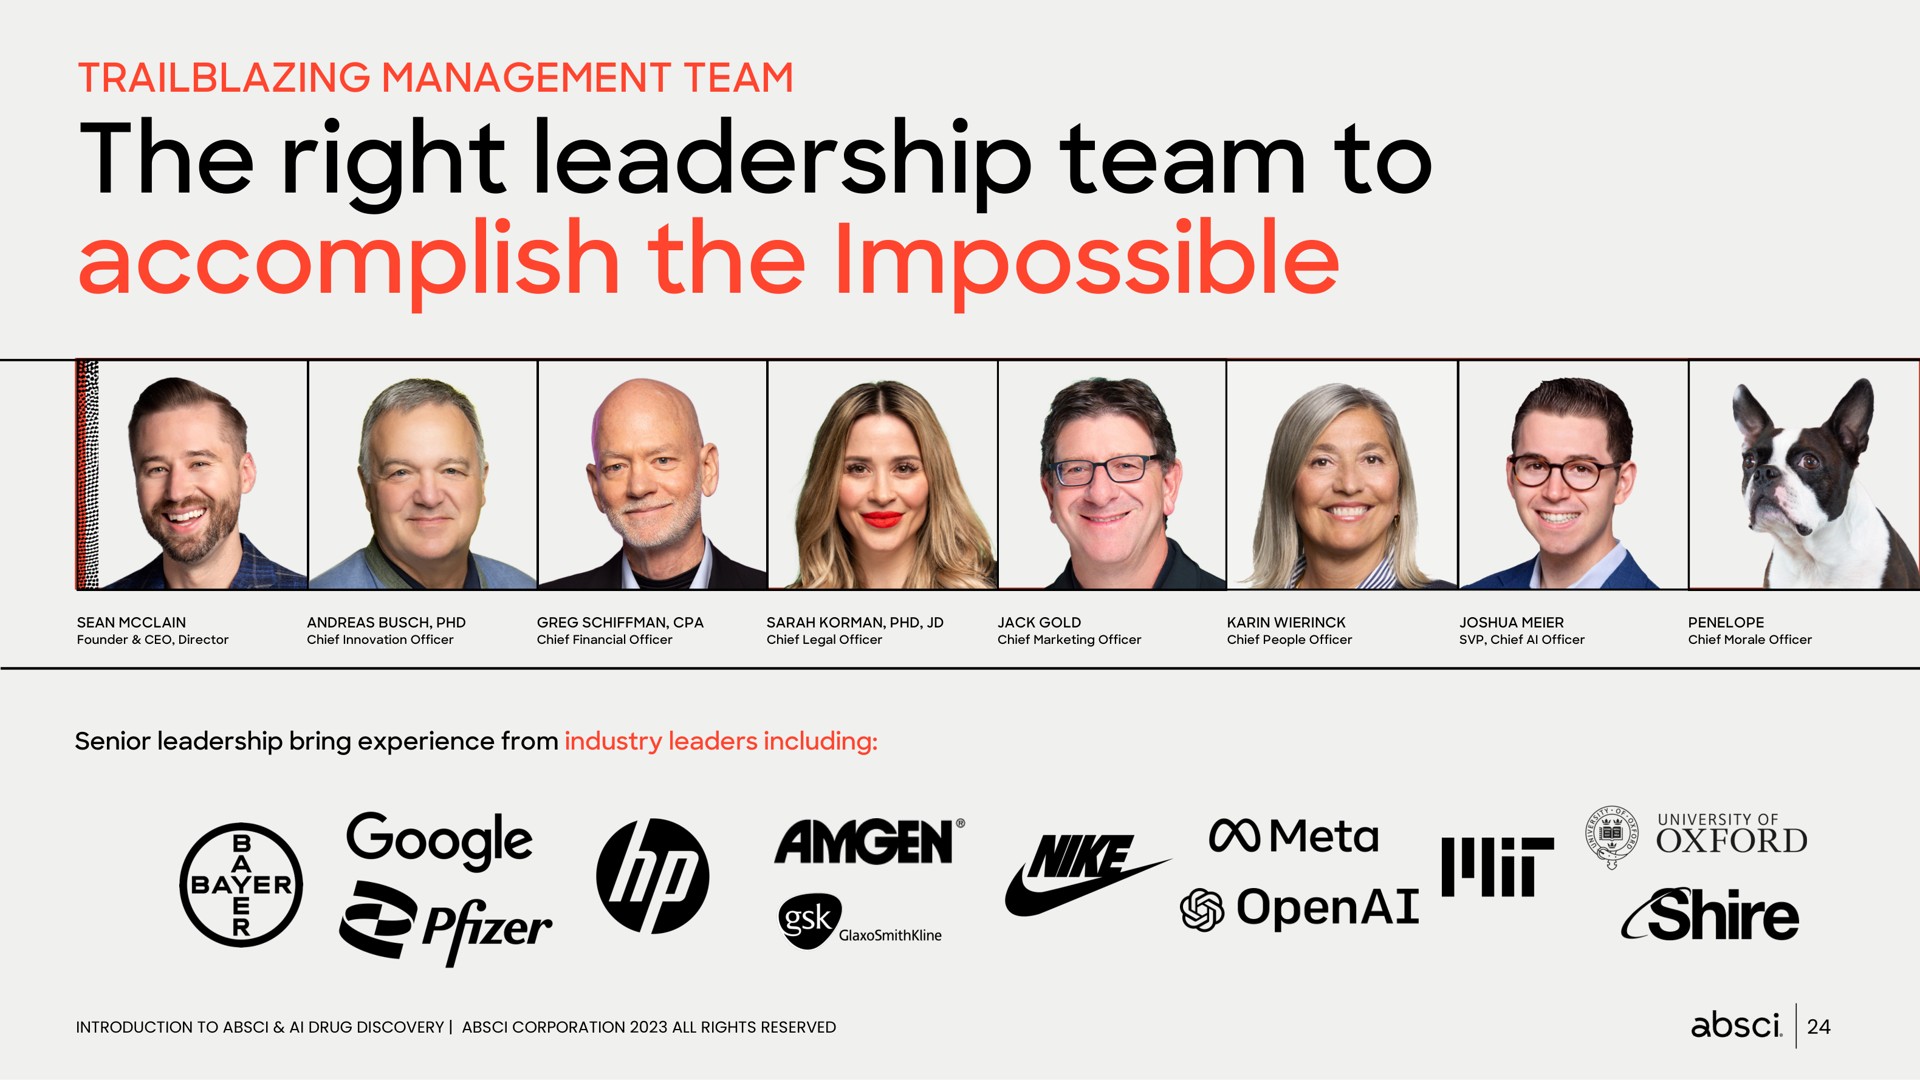 management team the right leadership team to accomplish the impossible yee | Absci